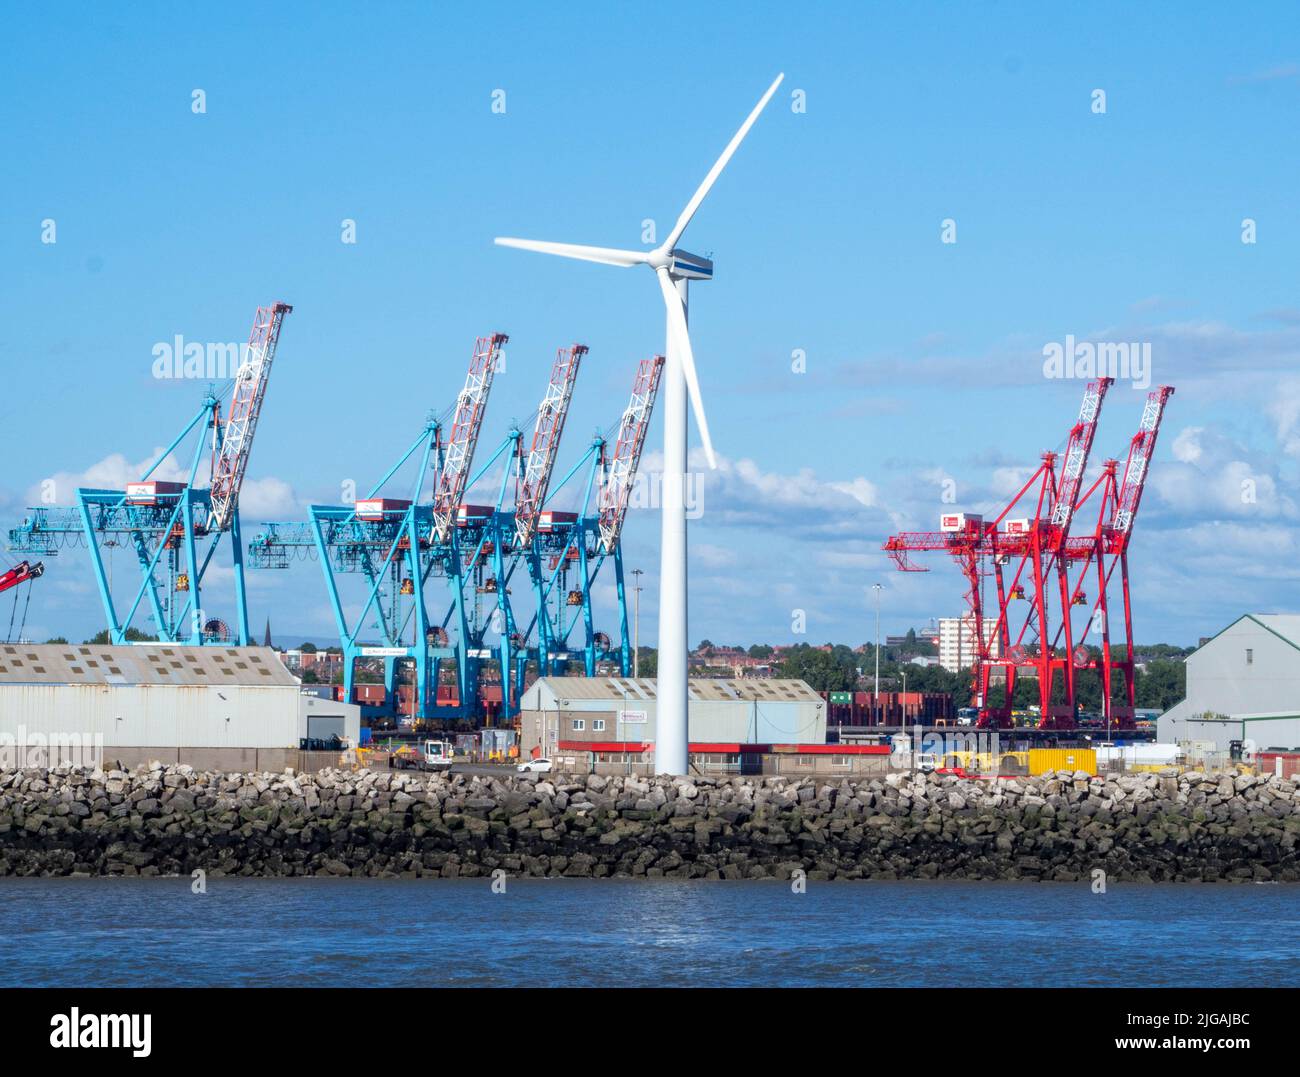 Liverpool2 is a container terminal extension adjoining the River Mersey in Seaforth, is an expansion of the Seaforth Dock container terminal. Stock Photo